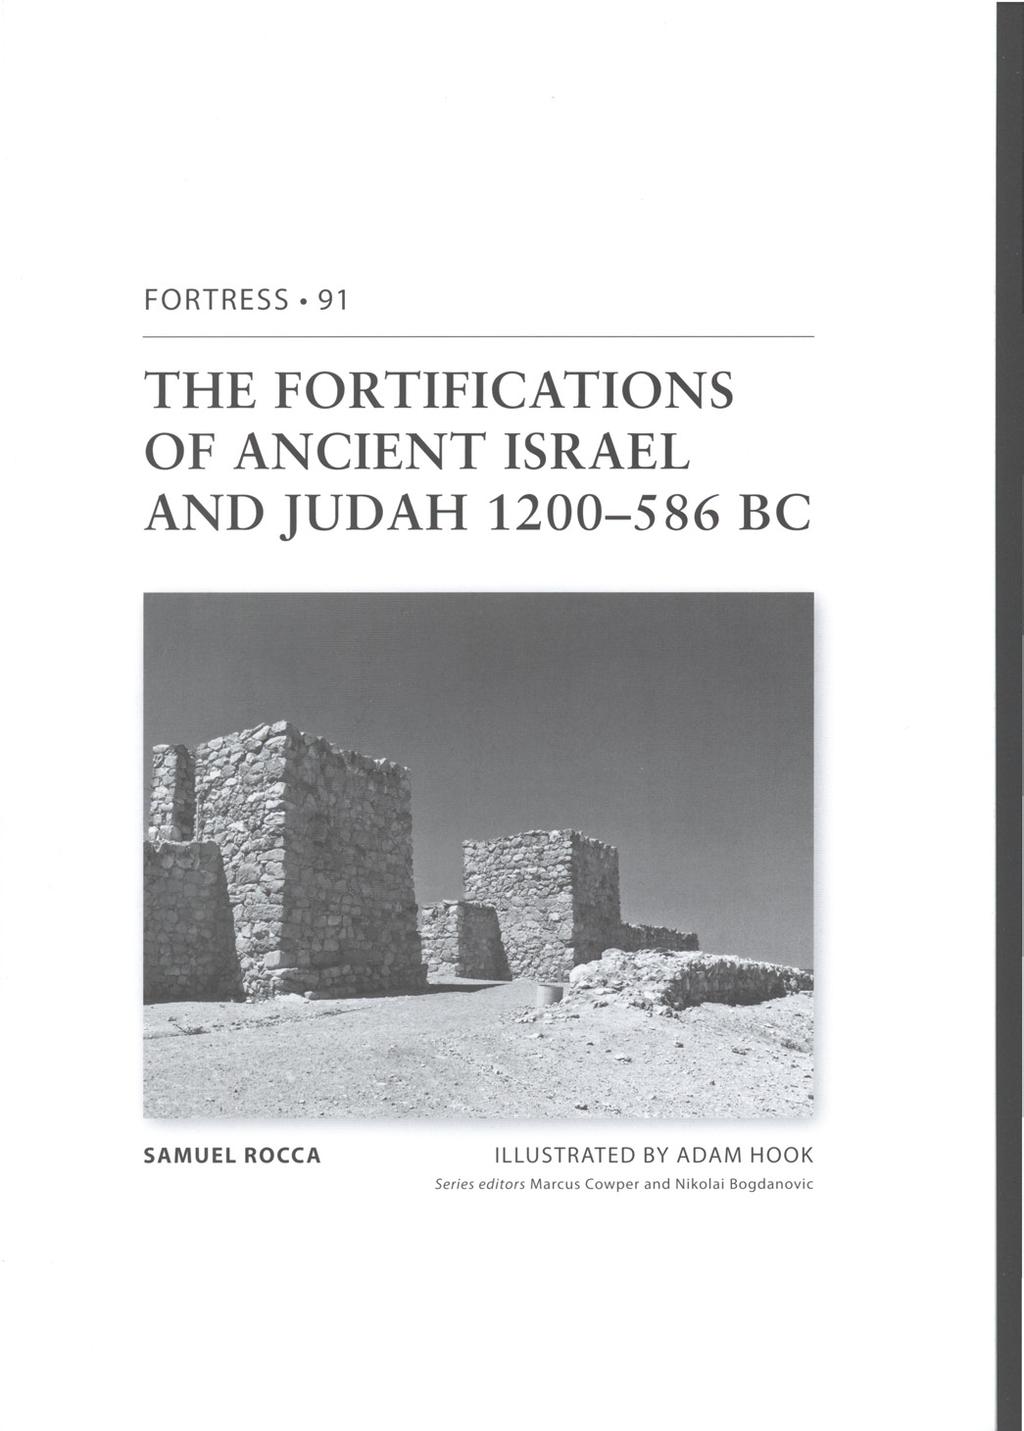 FORTRESS 91 THE FORTIFICATIONS OF ANCIENT ISRAEL AND JUDAH 1200-586 BC SAMUEL